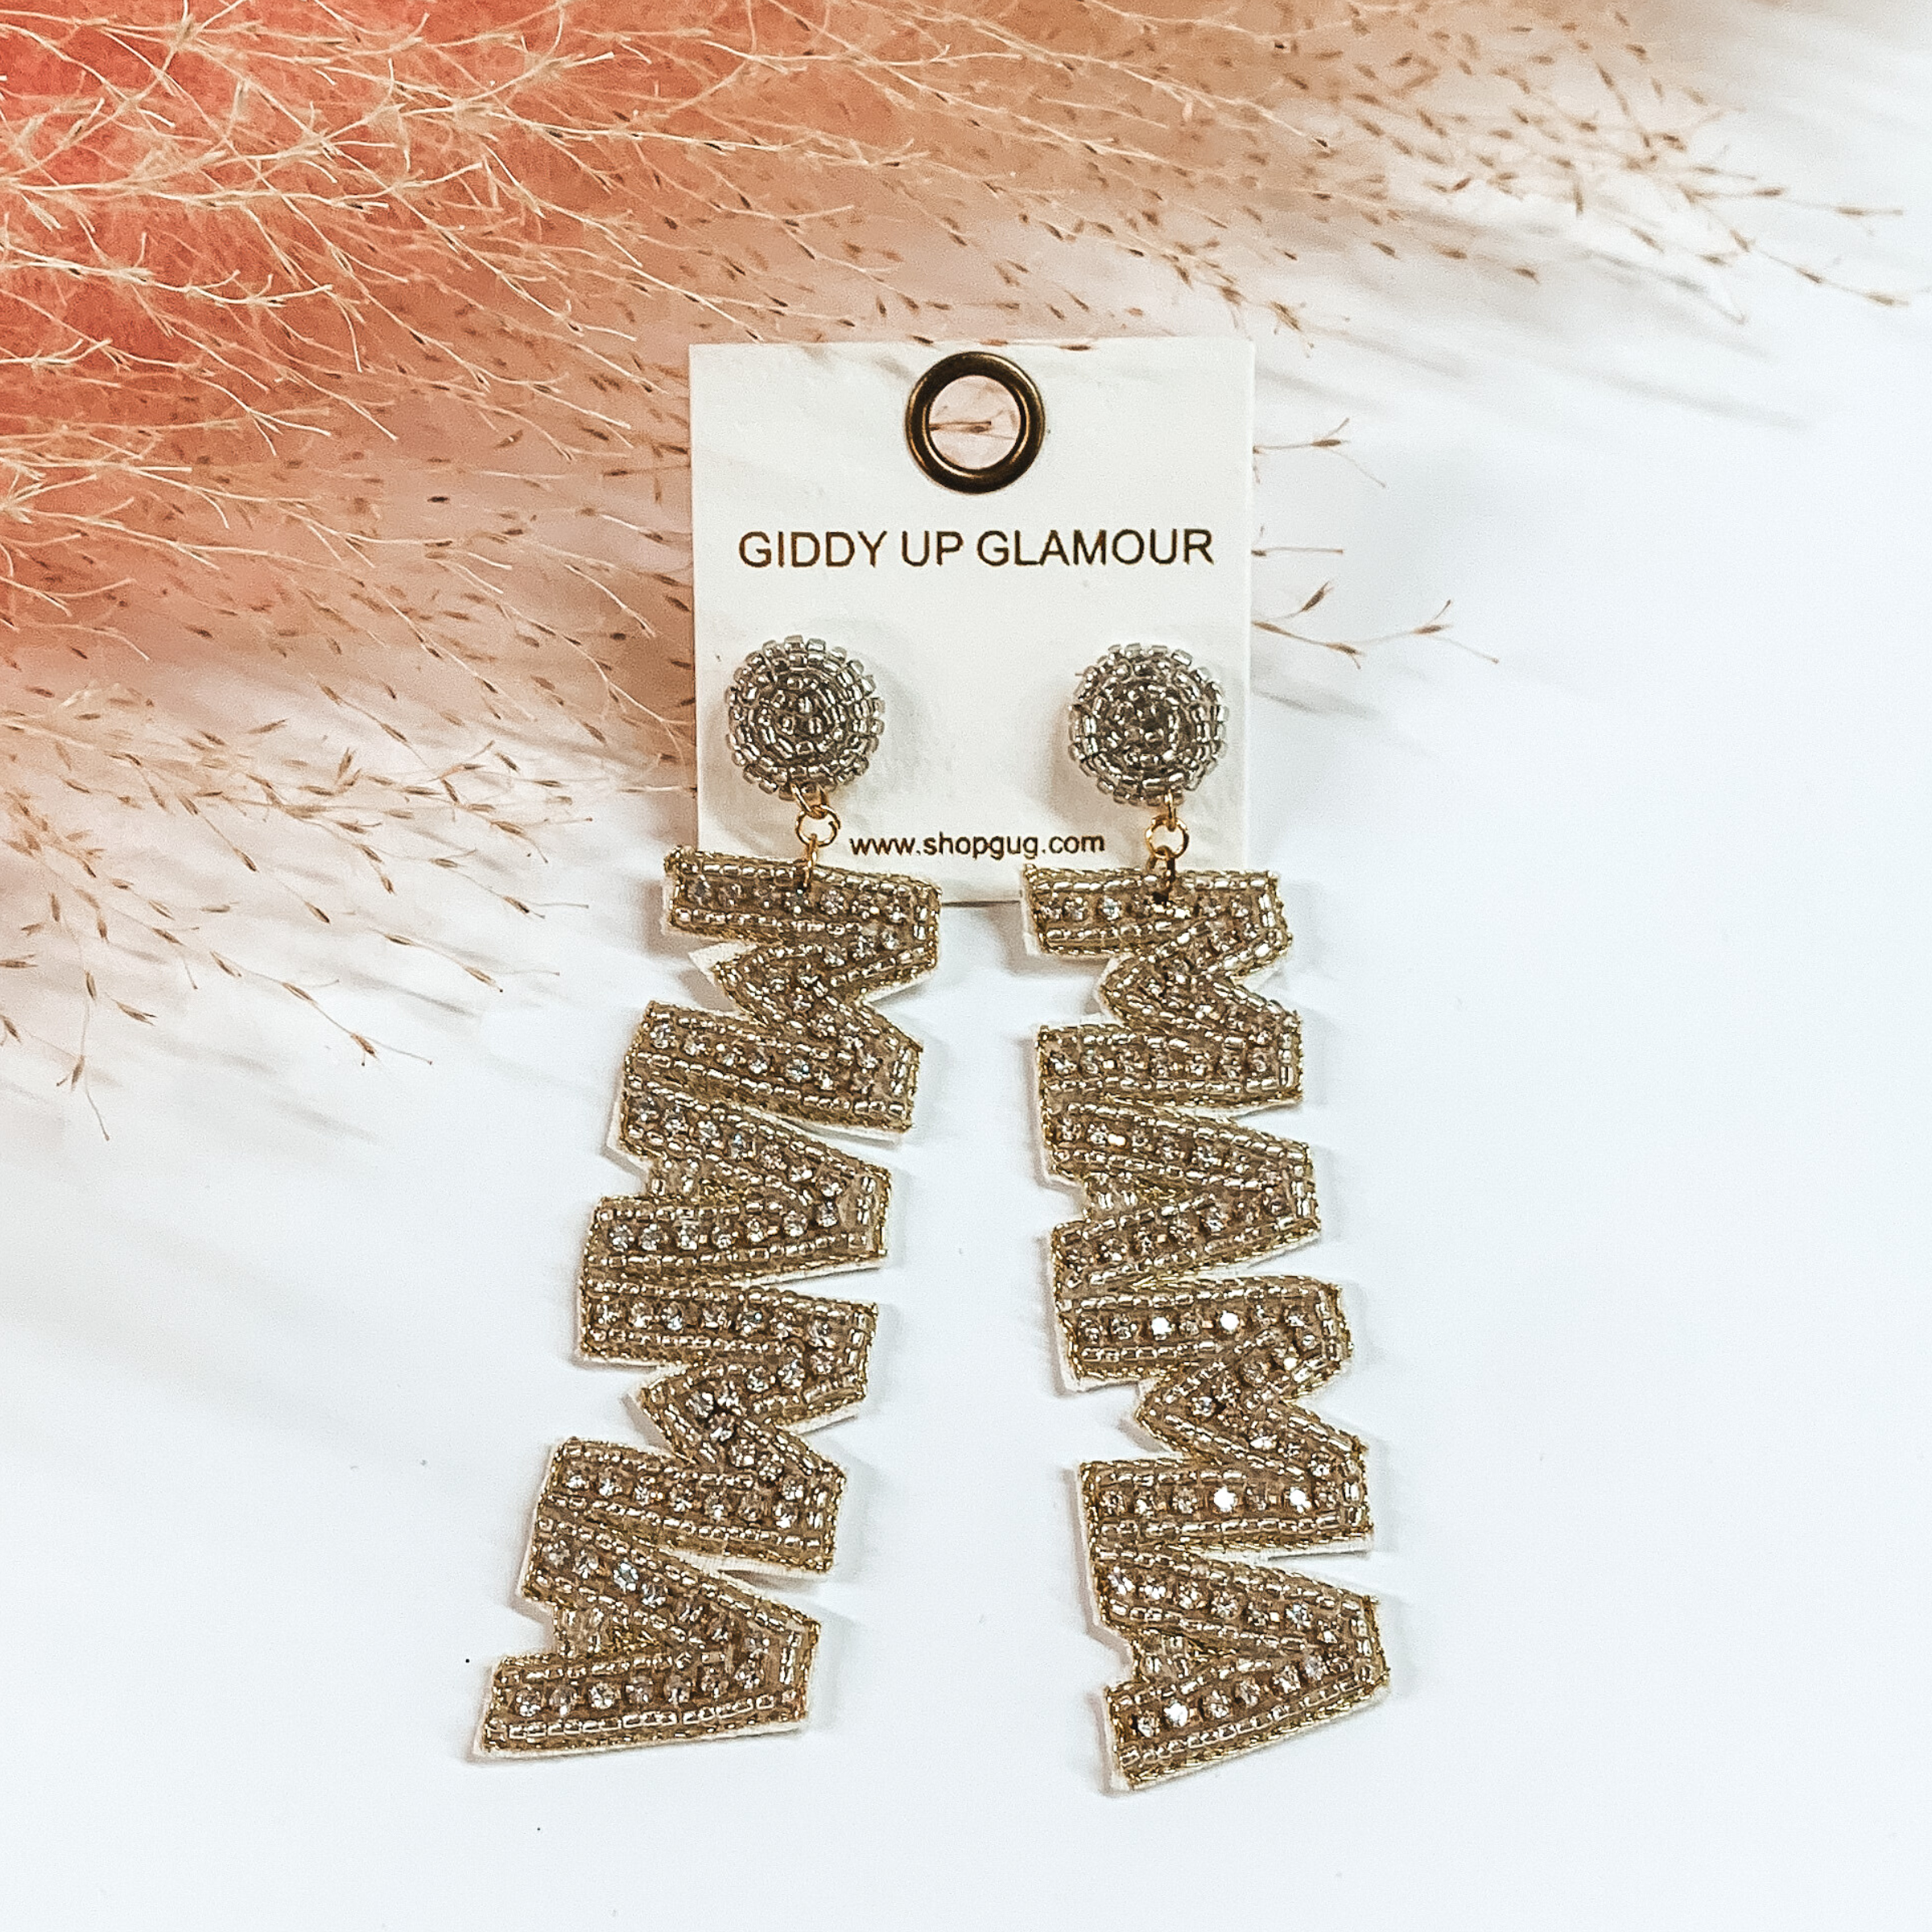 These earrings include silver, circle, beaded post back earrings with a long dangle. This dangle spells out "MAMA" in silver beads with an inlay of clear crystals. These earrings are pictured on a white background with pink pompous grass at the top. 